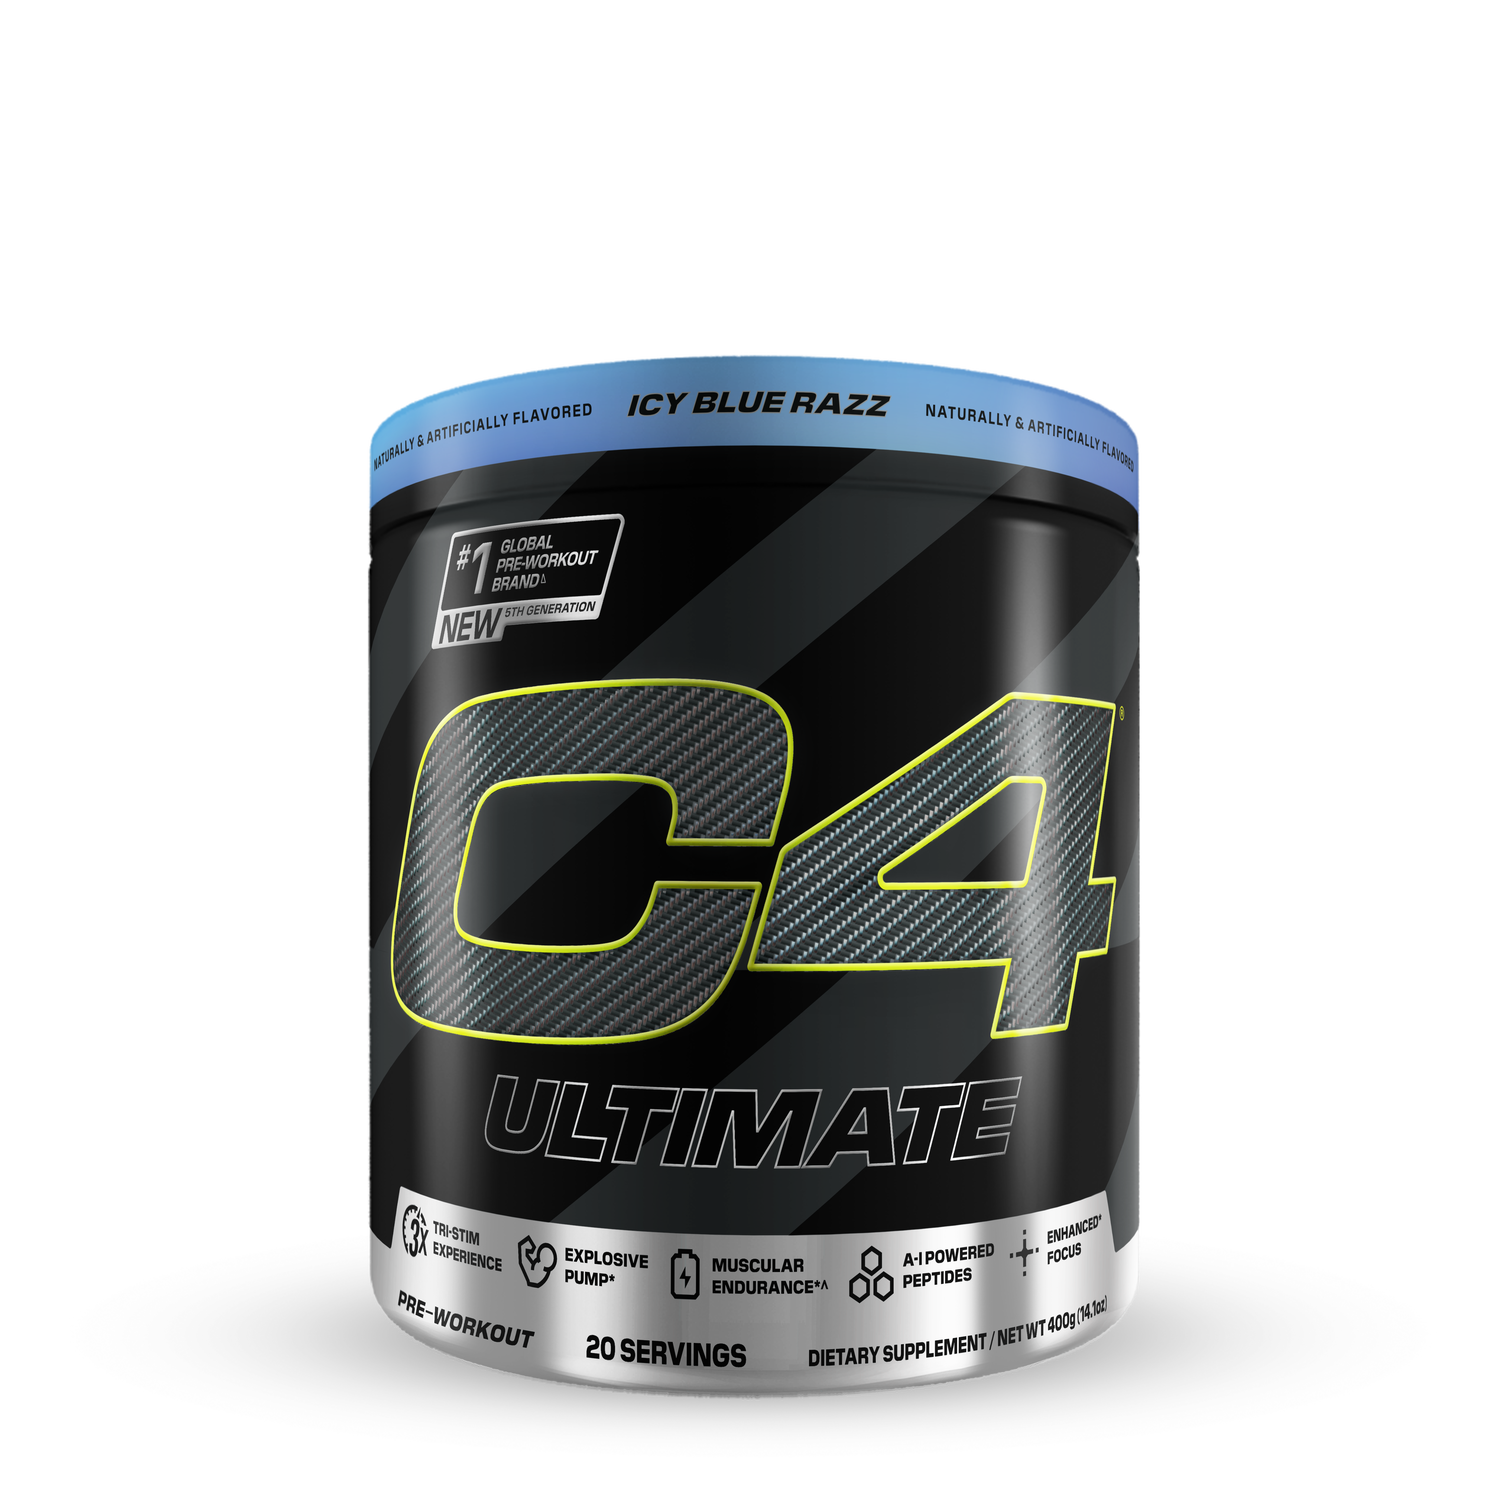 Cellucor C4 Ultimate Pre-Workout - Icy Blue Razz (20 Servings)